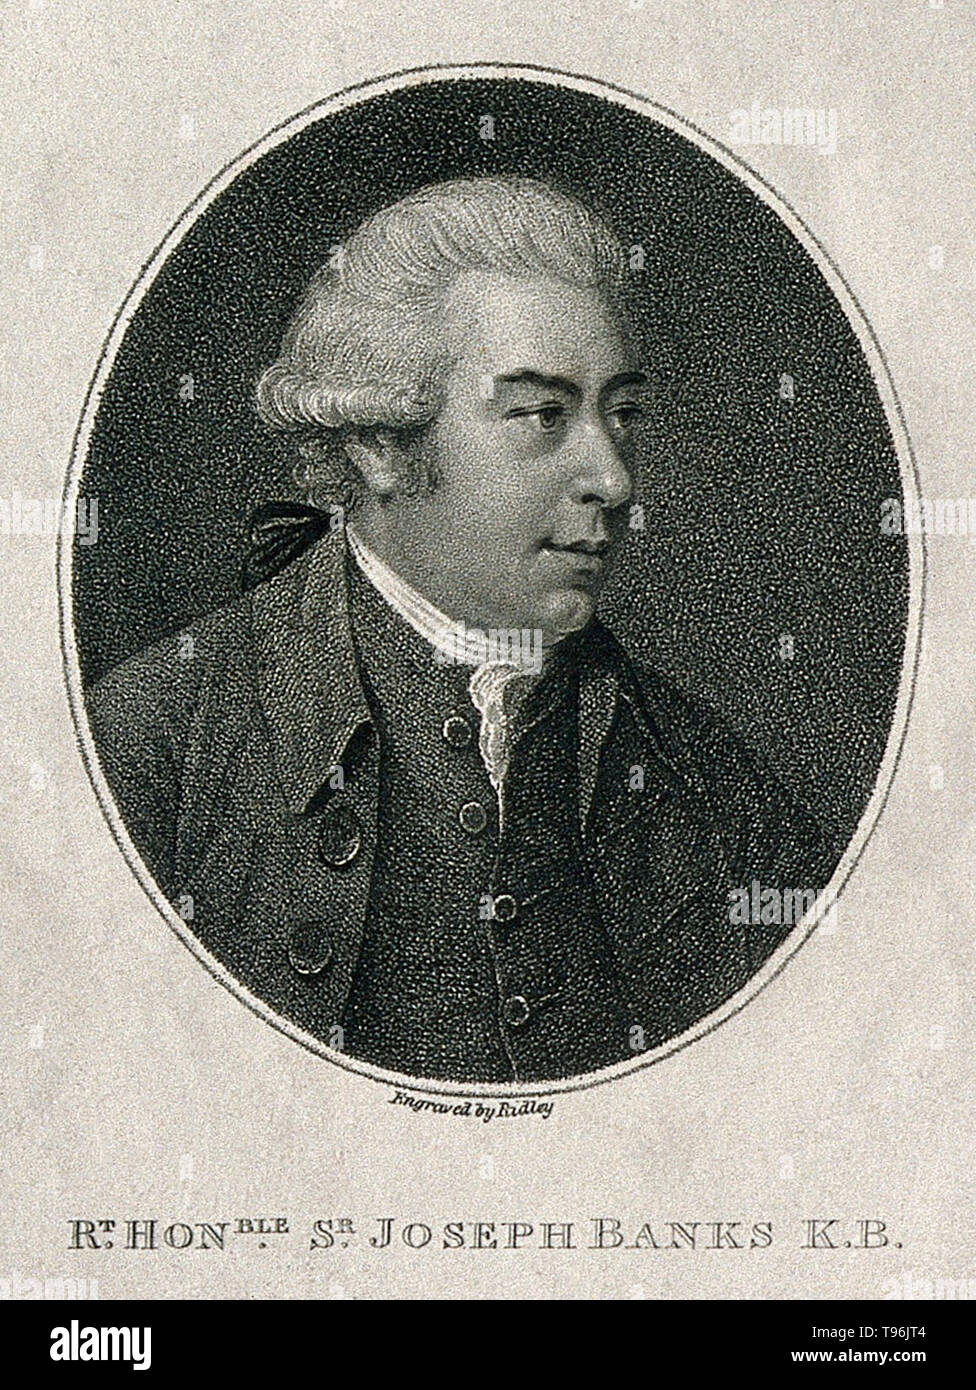 Sir Joseph Banks, 1st Baronet (February 24, 1743 - June 19, 1820)  English naturalist and botanist. Banks made his name on the 1766 natural history expedition to Newfoundland and Labrador. He took part in Cook's first great voyage (1768-71), visiting Brazil, Tahiti, New Zealand, and Australia. He held the position of President of the Royal Society for over 41 years. Stock Photo